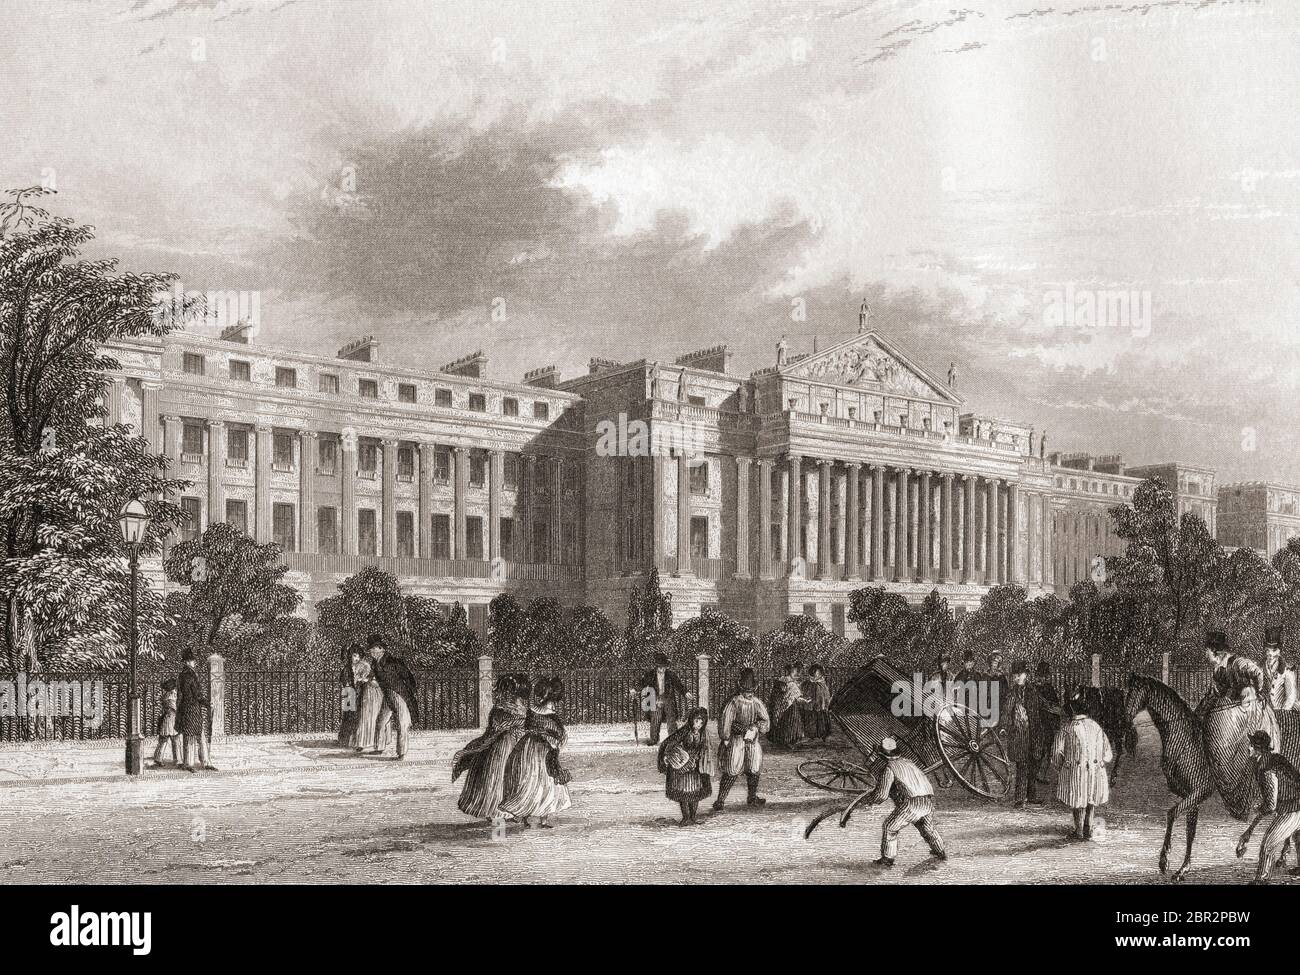 Cumberland Terrace, Regent's Park, London, England, 19th century.  From The History of London: Illustrated by Views in London and Westminster, published c.1838. Stock Photo